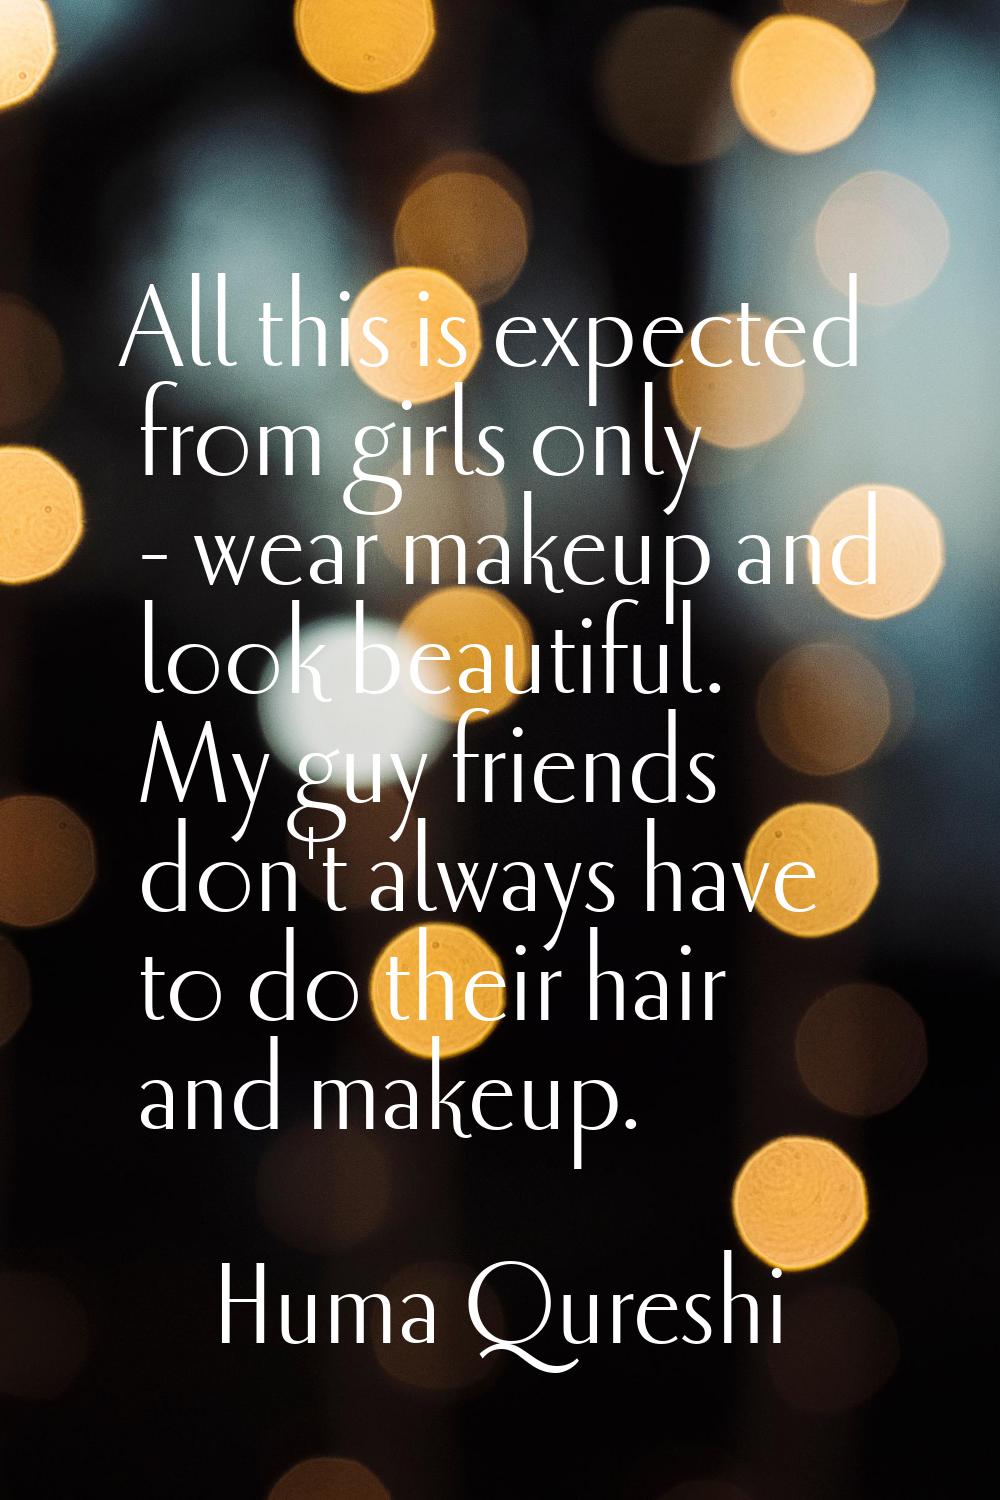 All this is expected from girls only - wear makeup and look beautiful. My guy friends don't always 